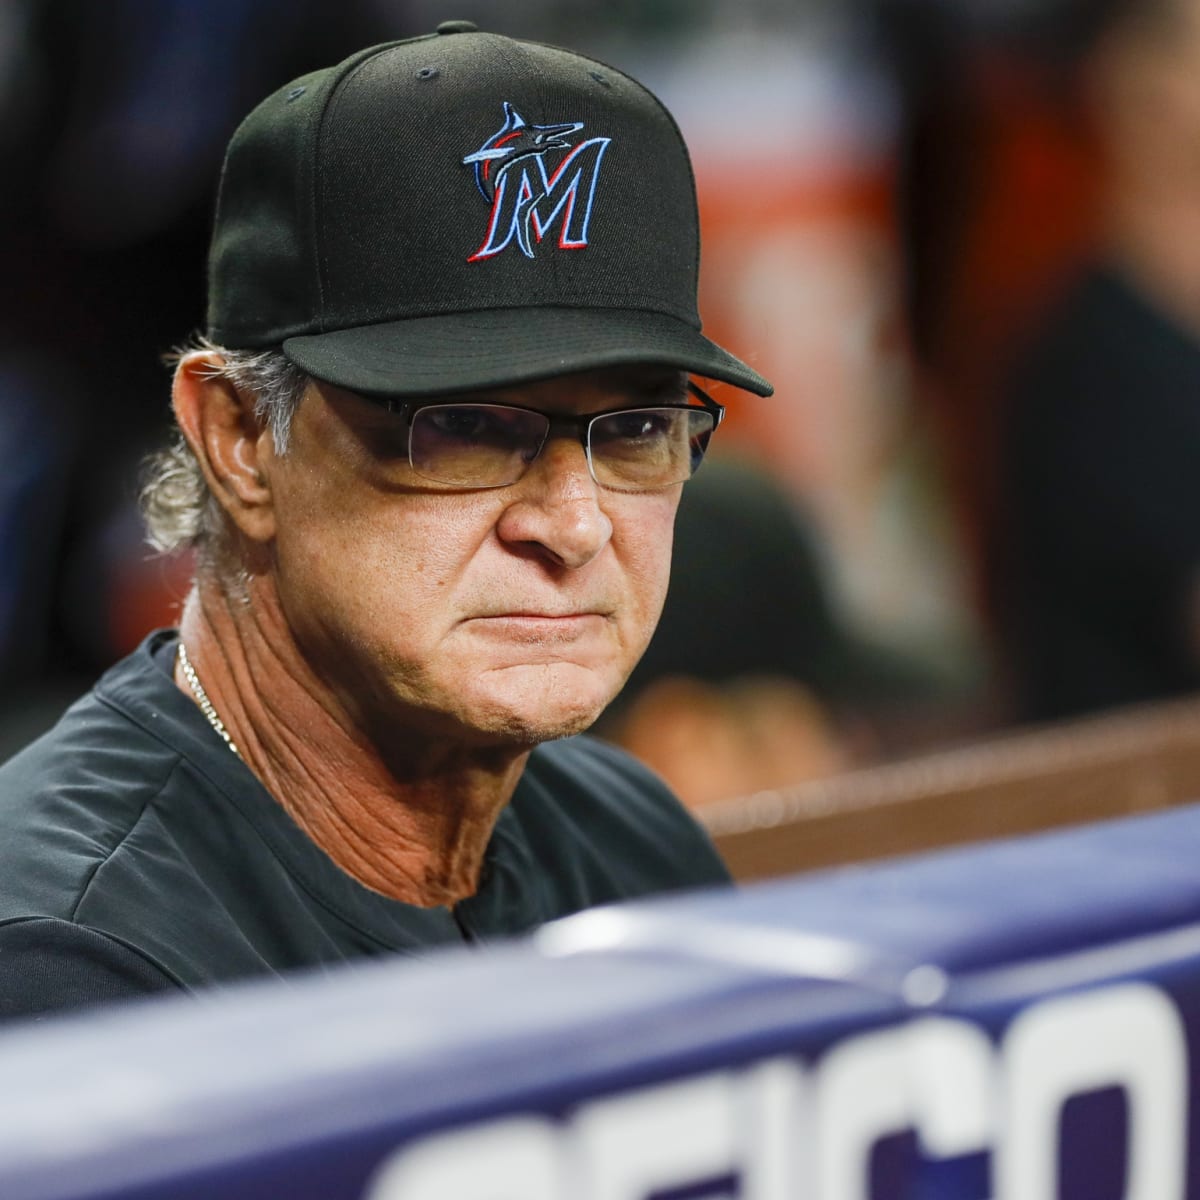 Marlins hire Mattingly as manager